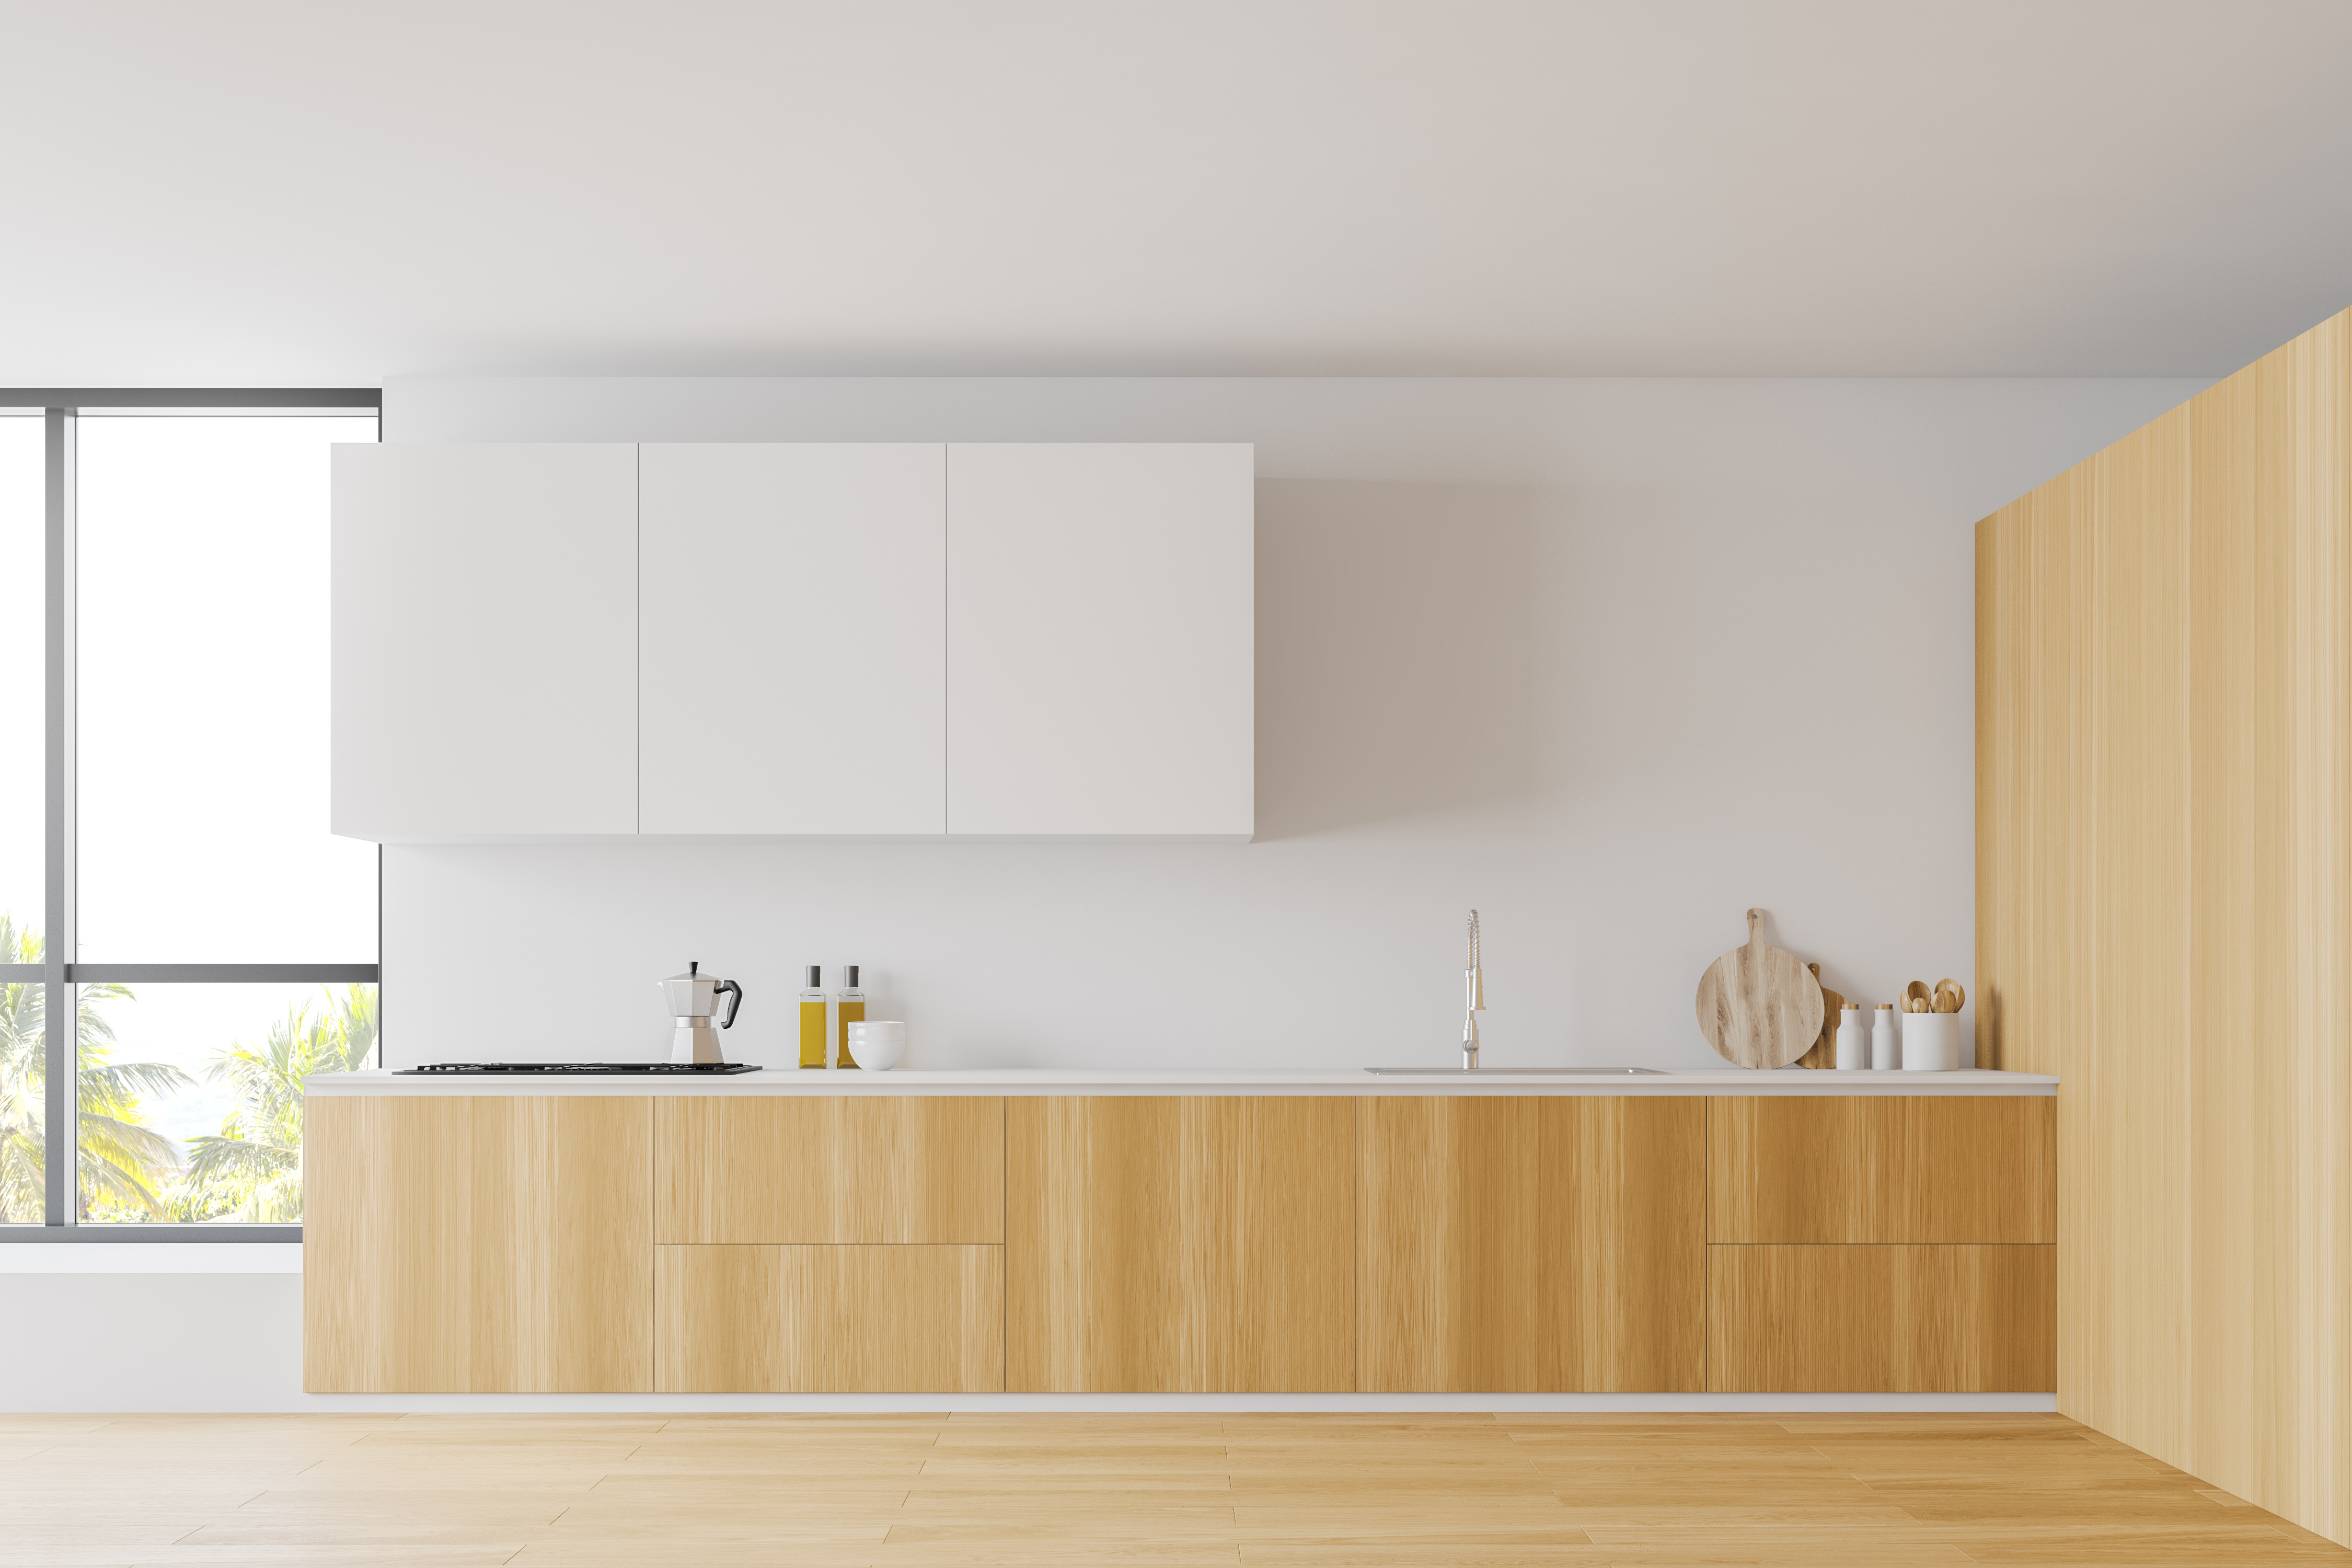 Clean lines are an element of minimalist design